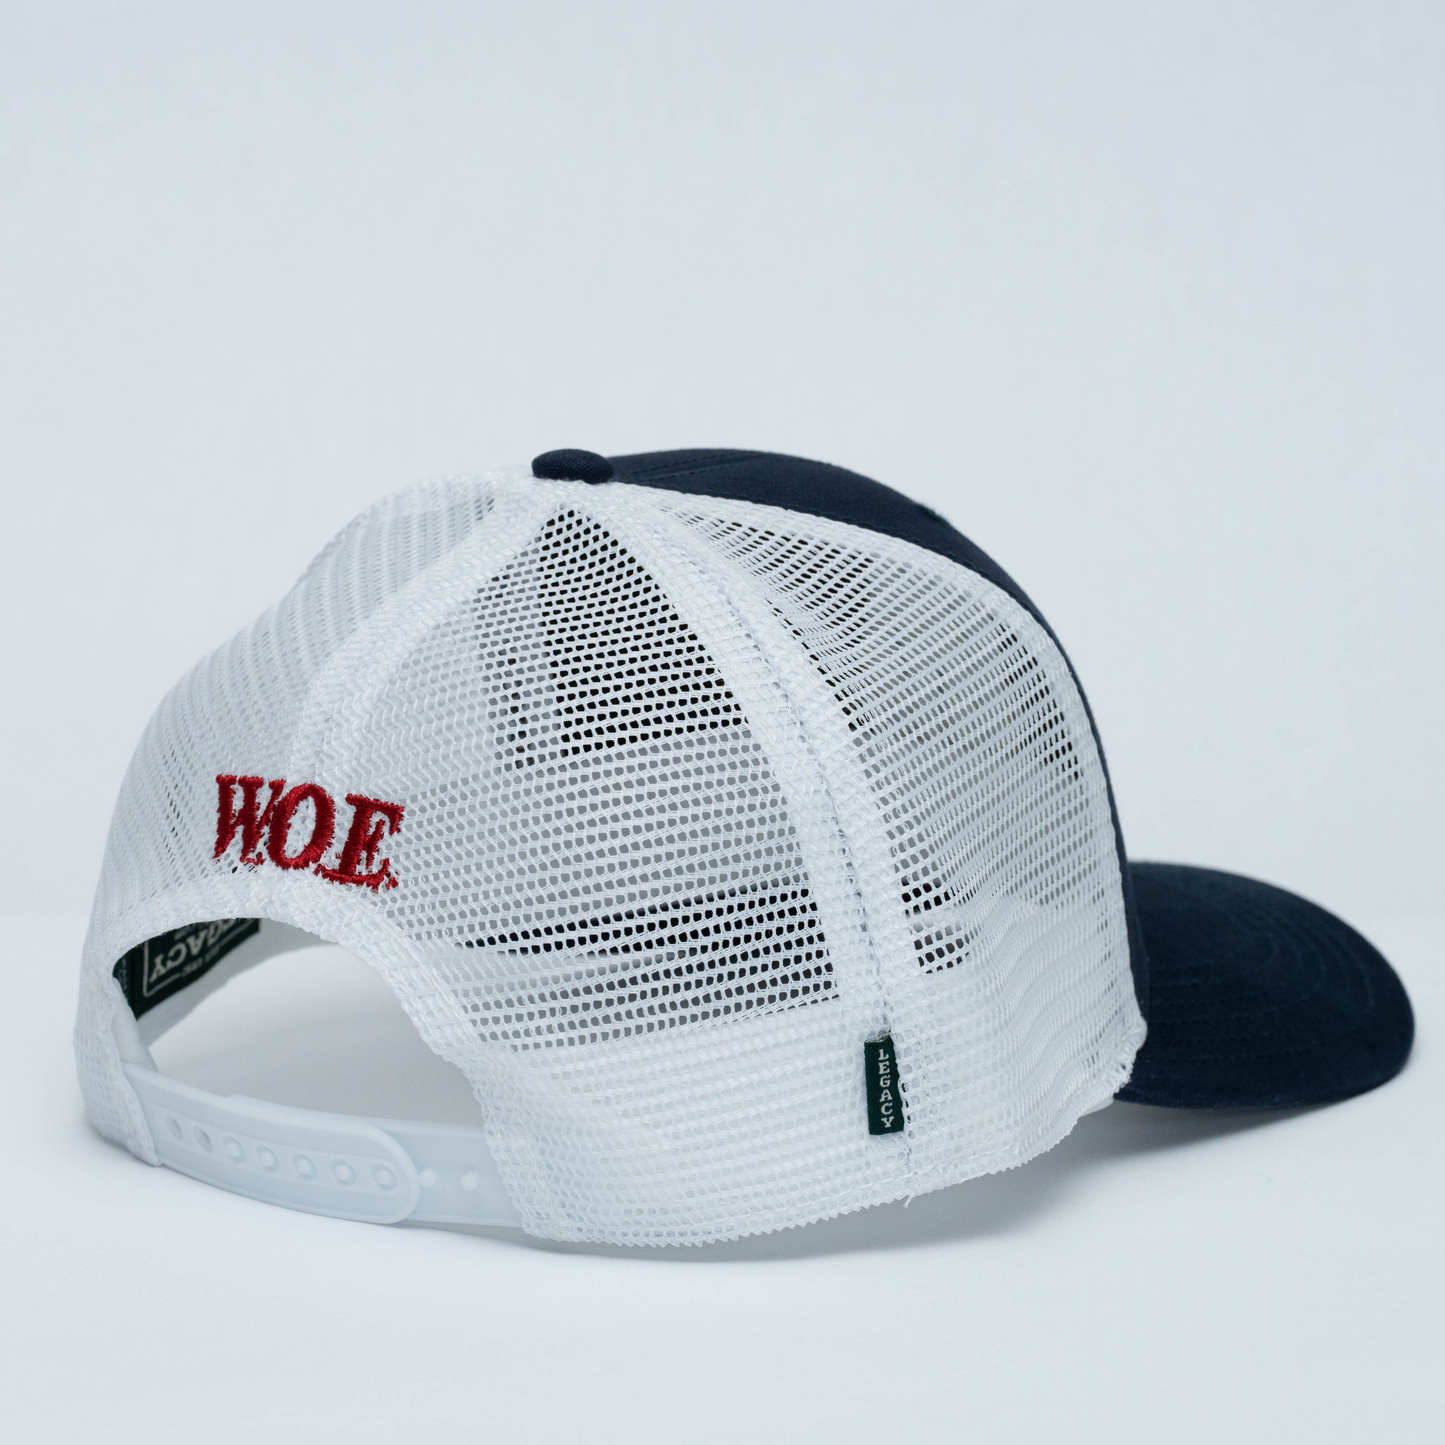 W.O.E. Spearhead Trucker Hat - Available NOW